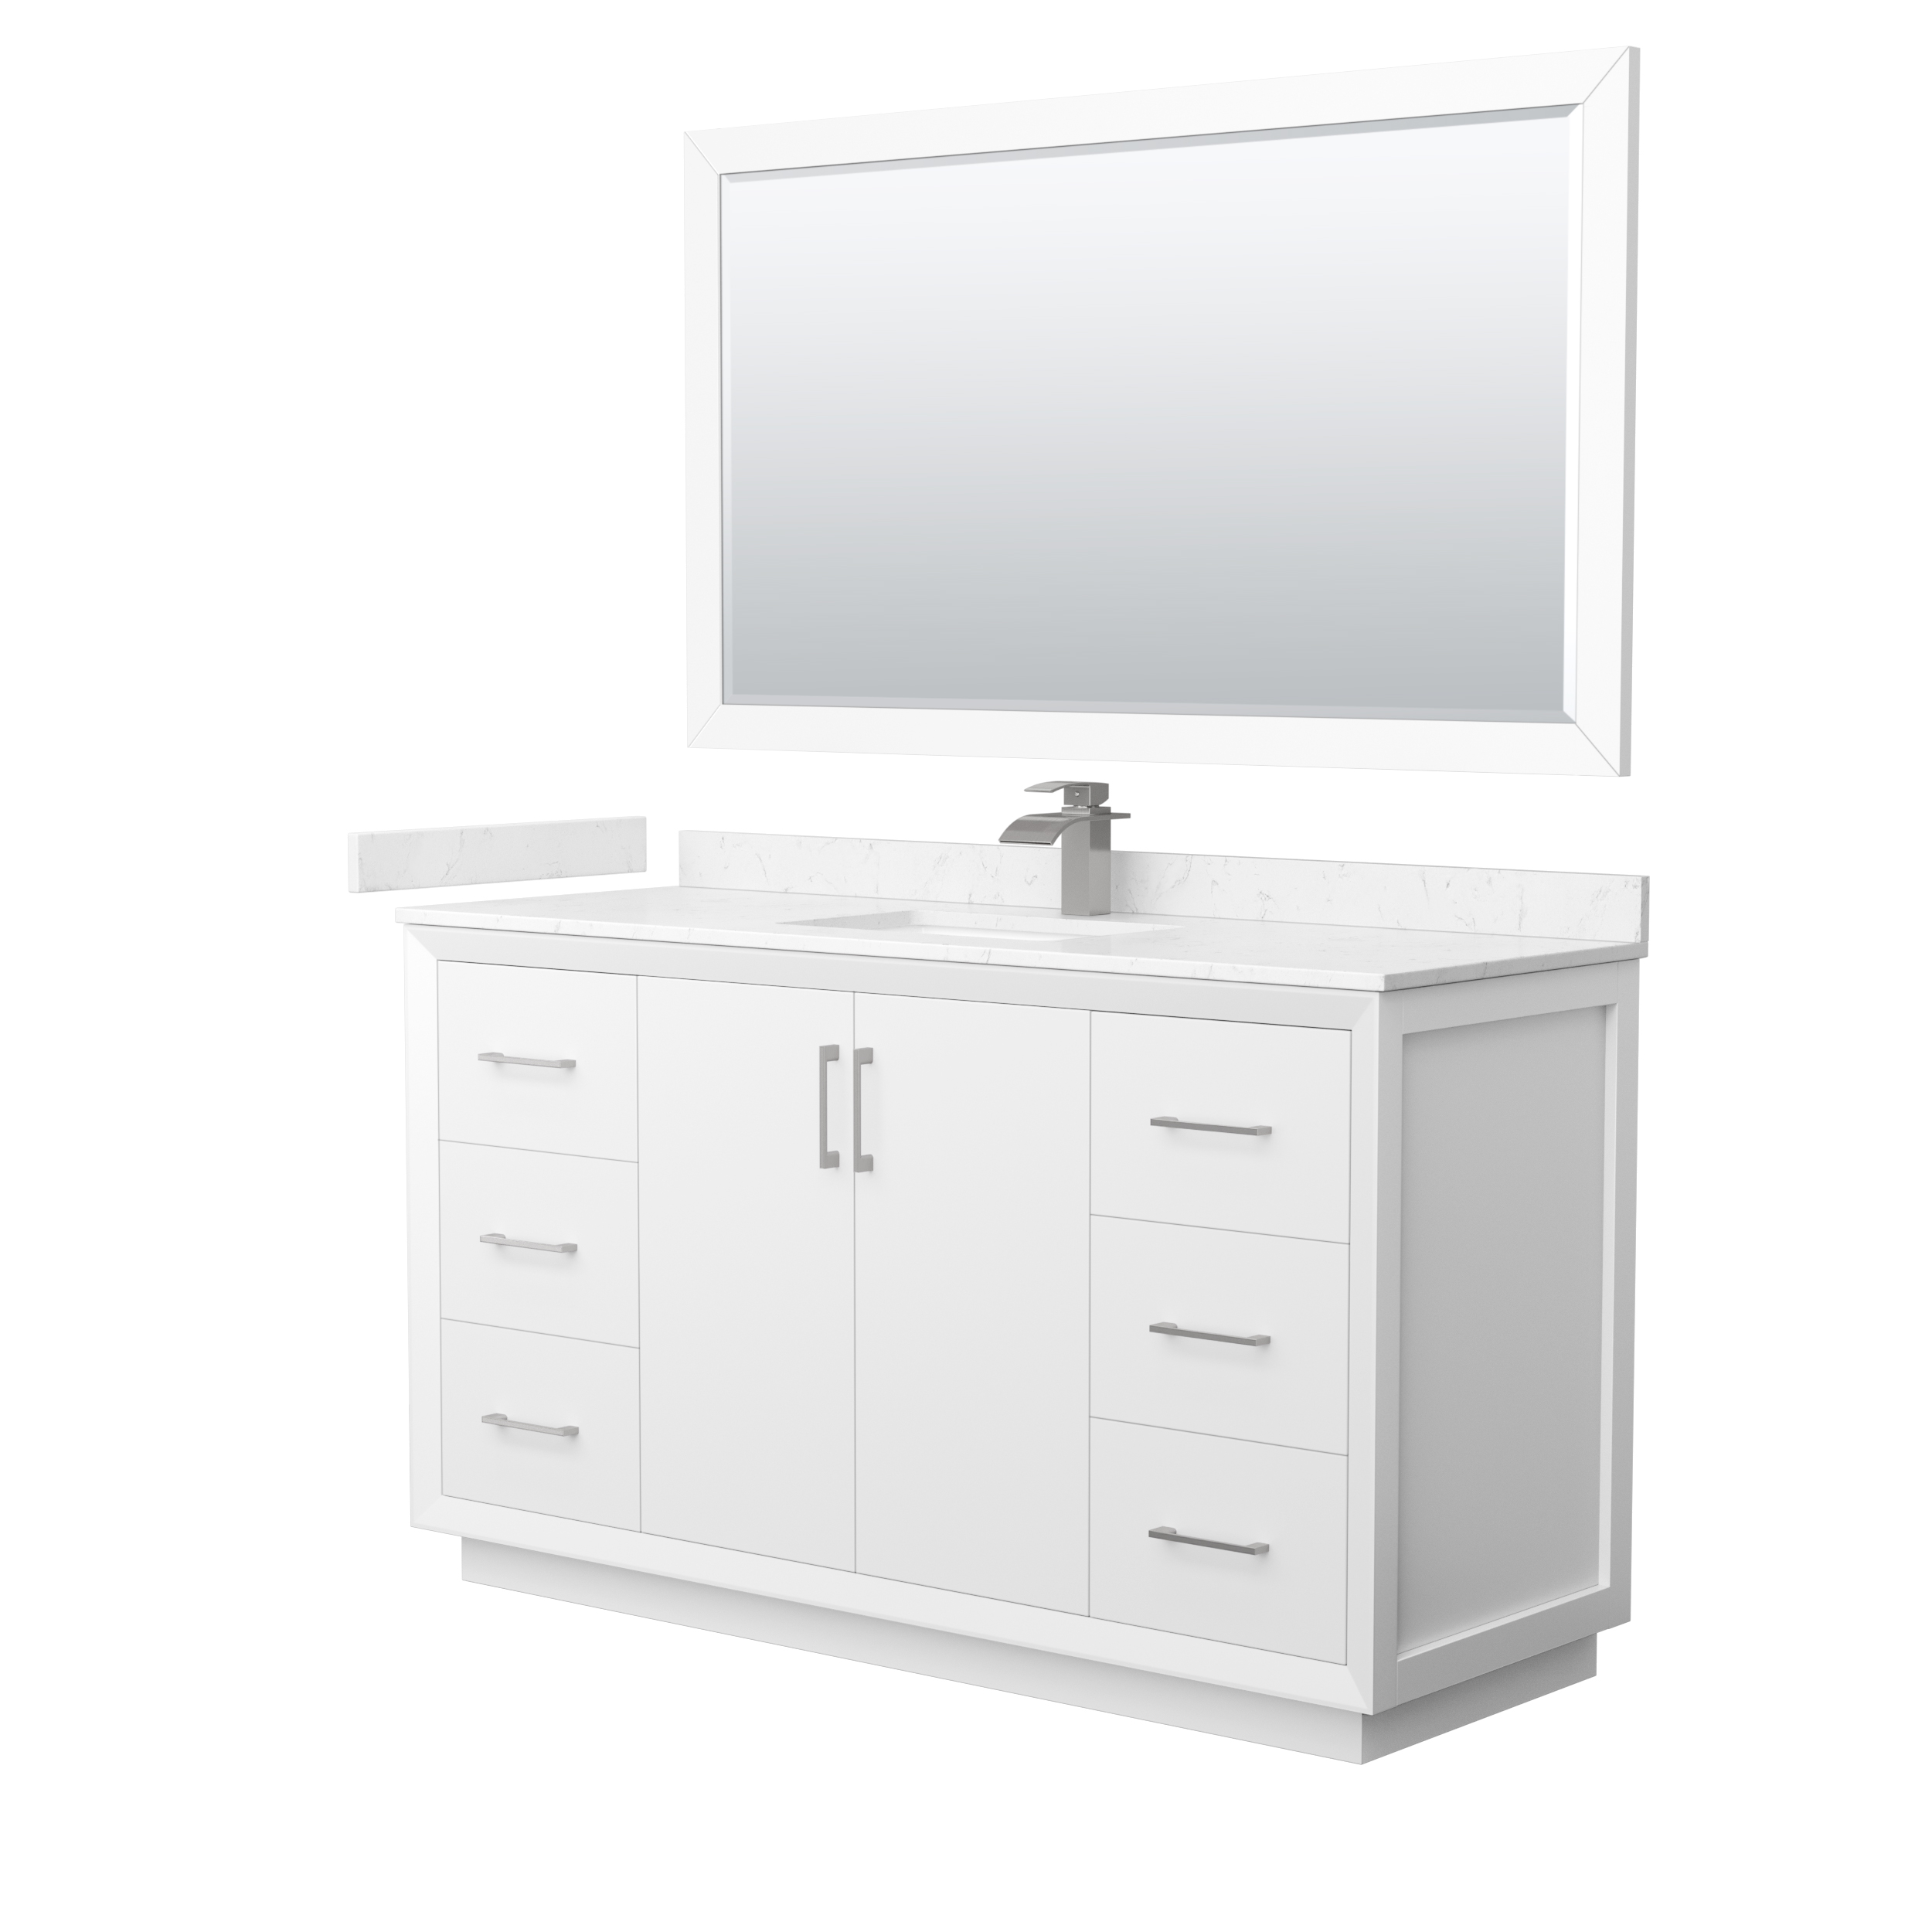 Strada 60" Single Vanity with optional Cultured Marble Counter - White WC-4141-60-SGL-VAN-WHT-